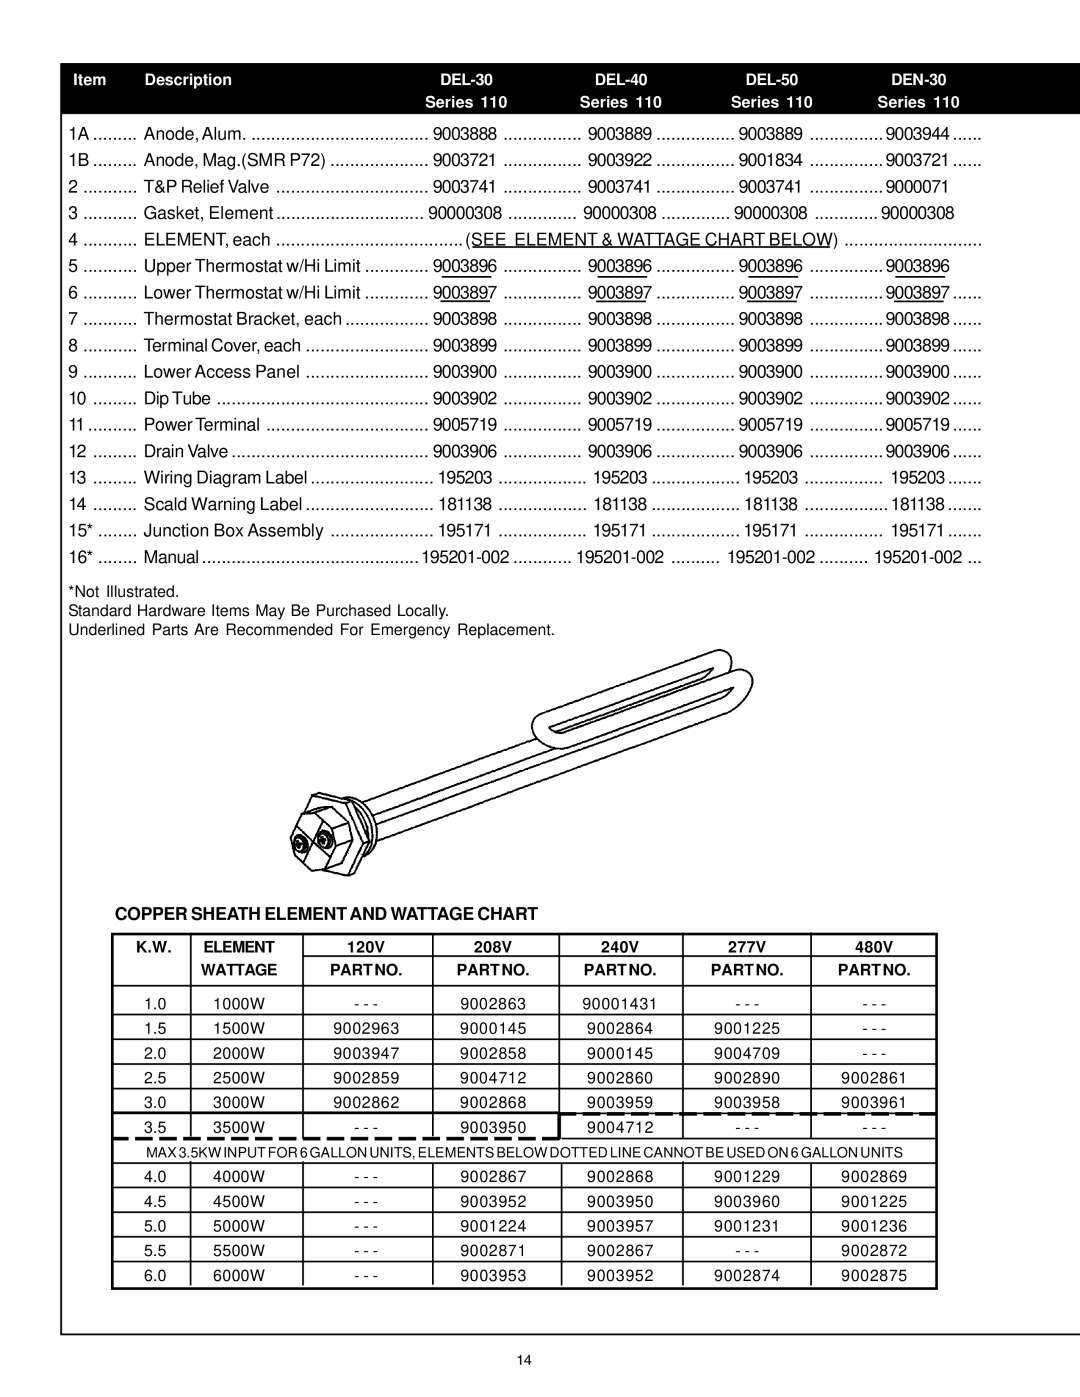 A.O. Smith del and del warranty See Element & Wattage Chart below, Copper Sheath Element and Wattage Chart 